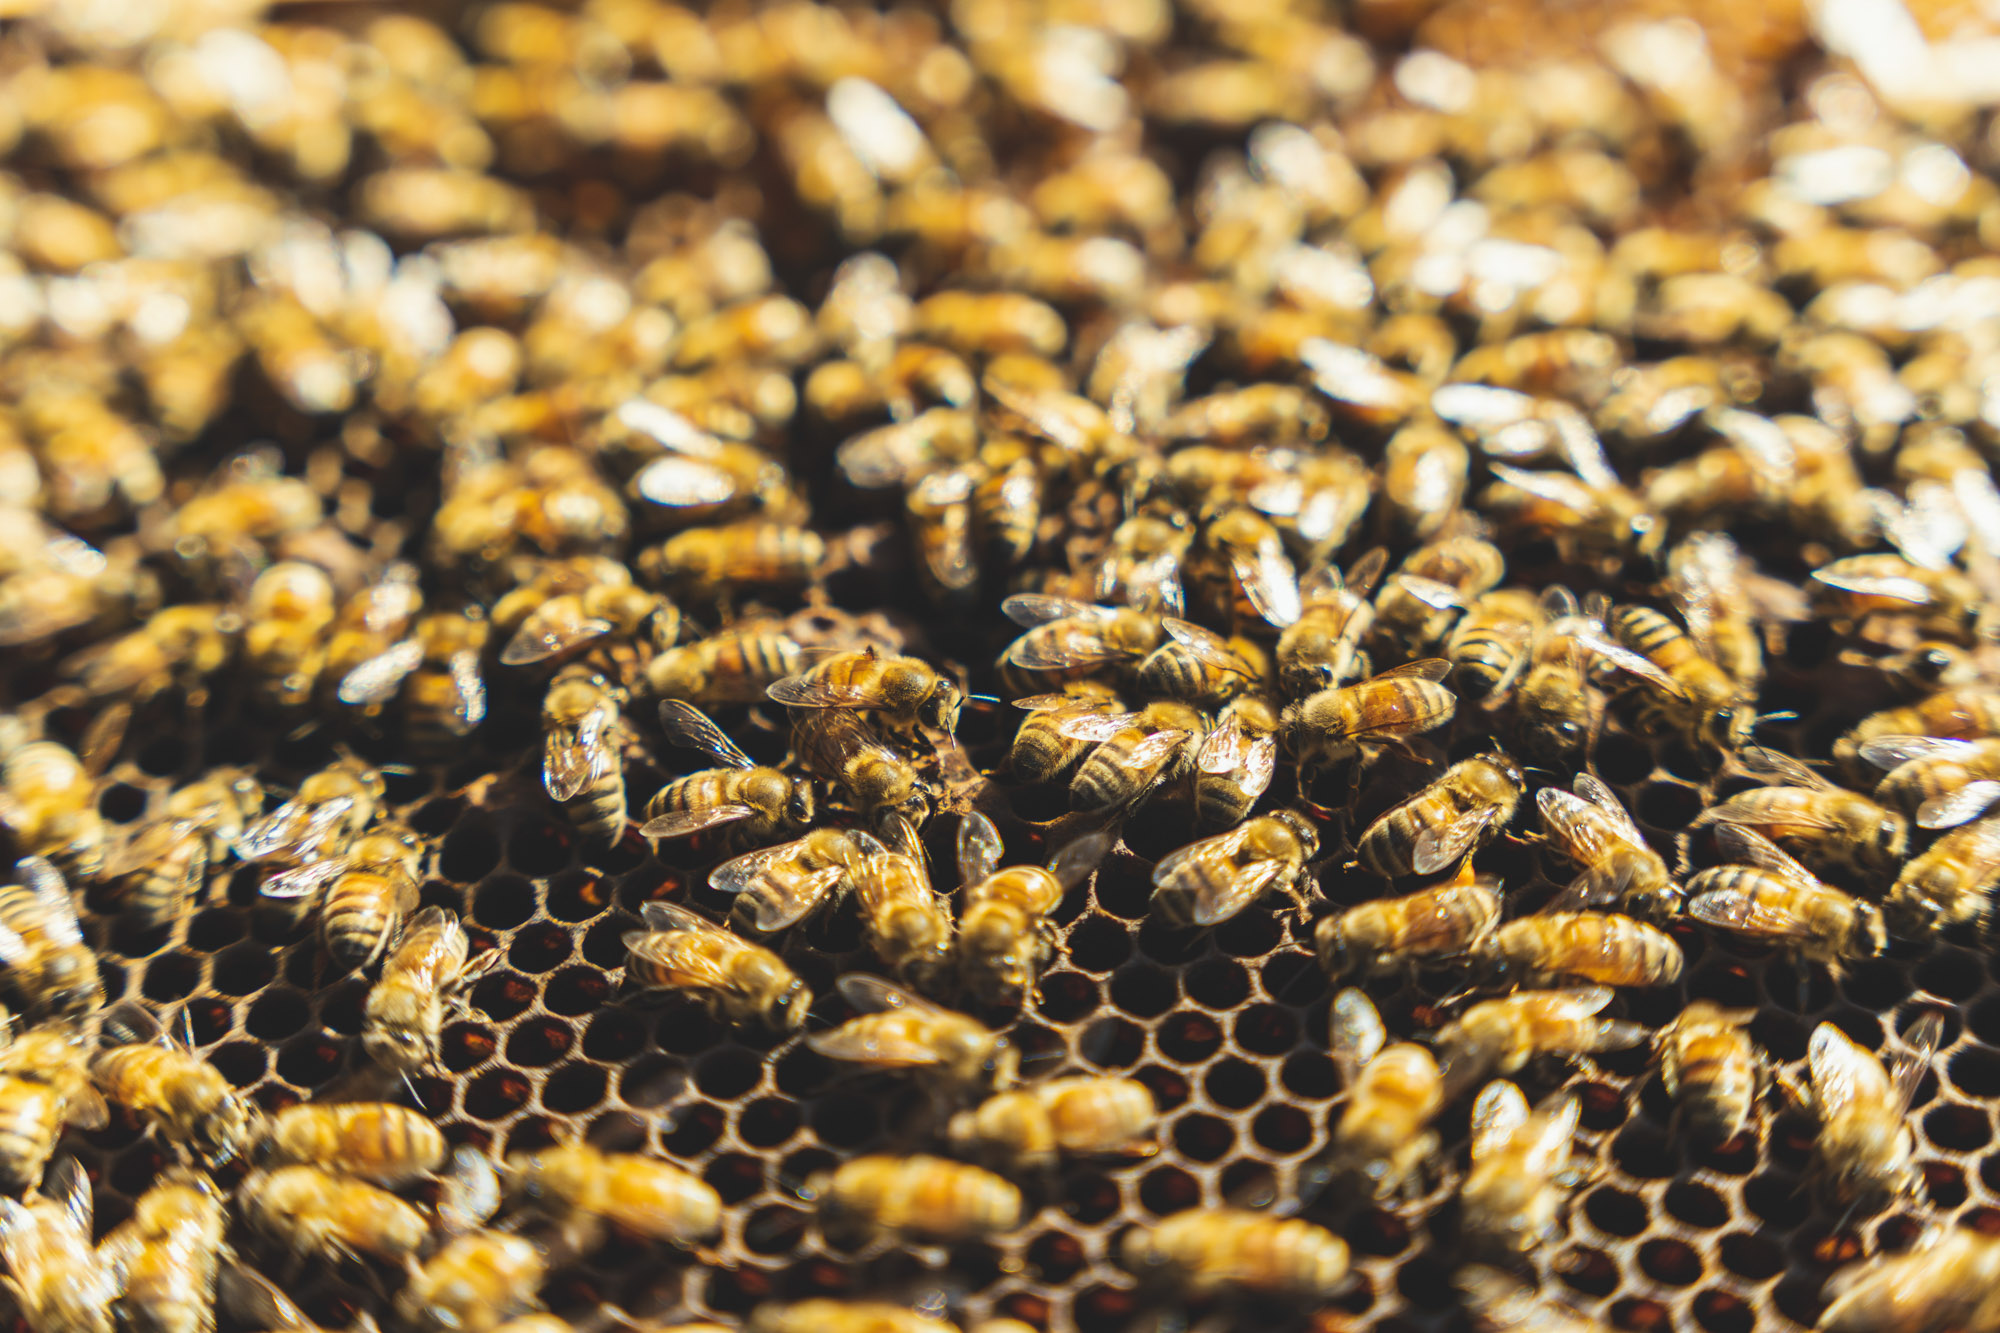 There is only one queen bee with about 10,000 worker bees living in one hive.